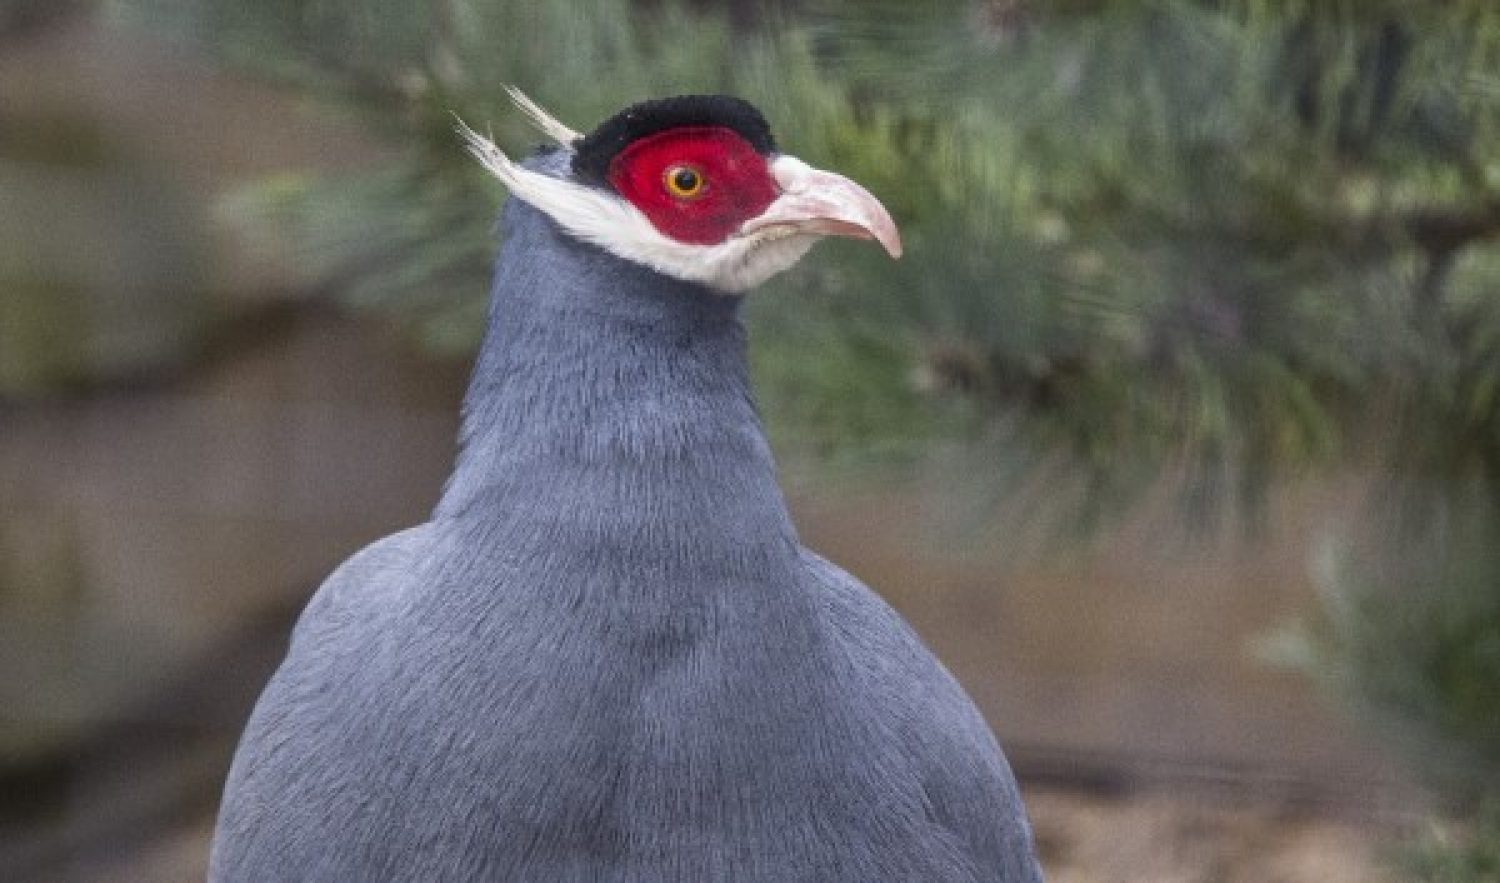 Photo of a pheasant with grey body and red head plumage